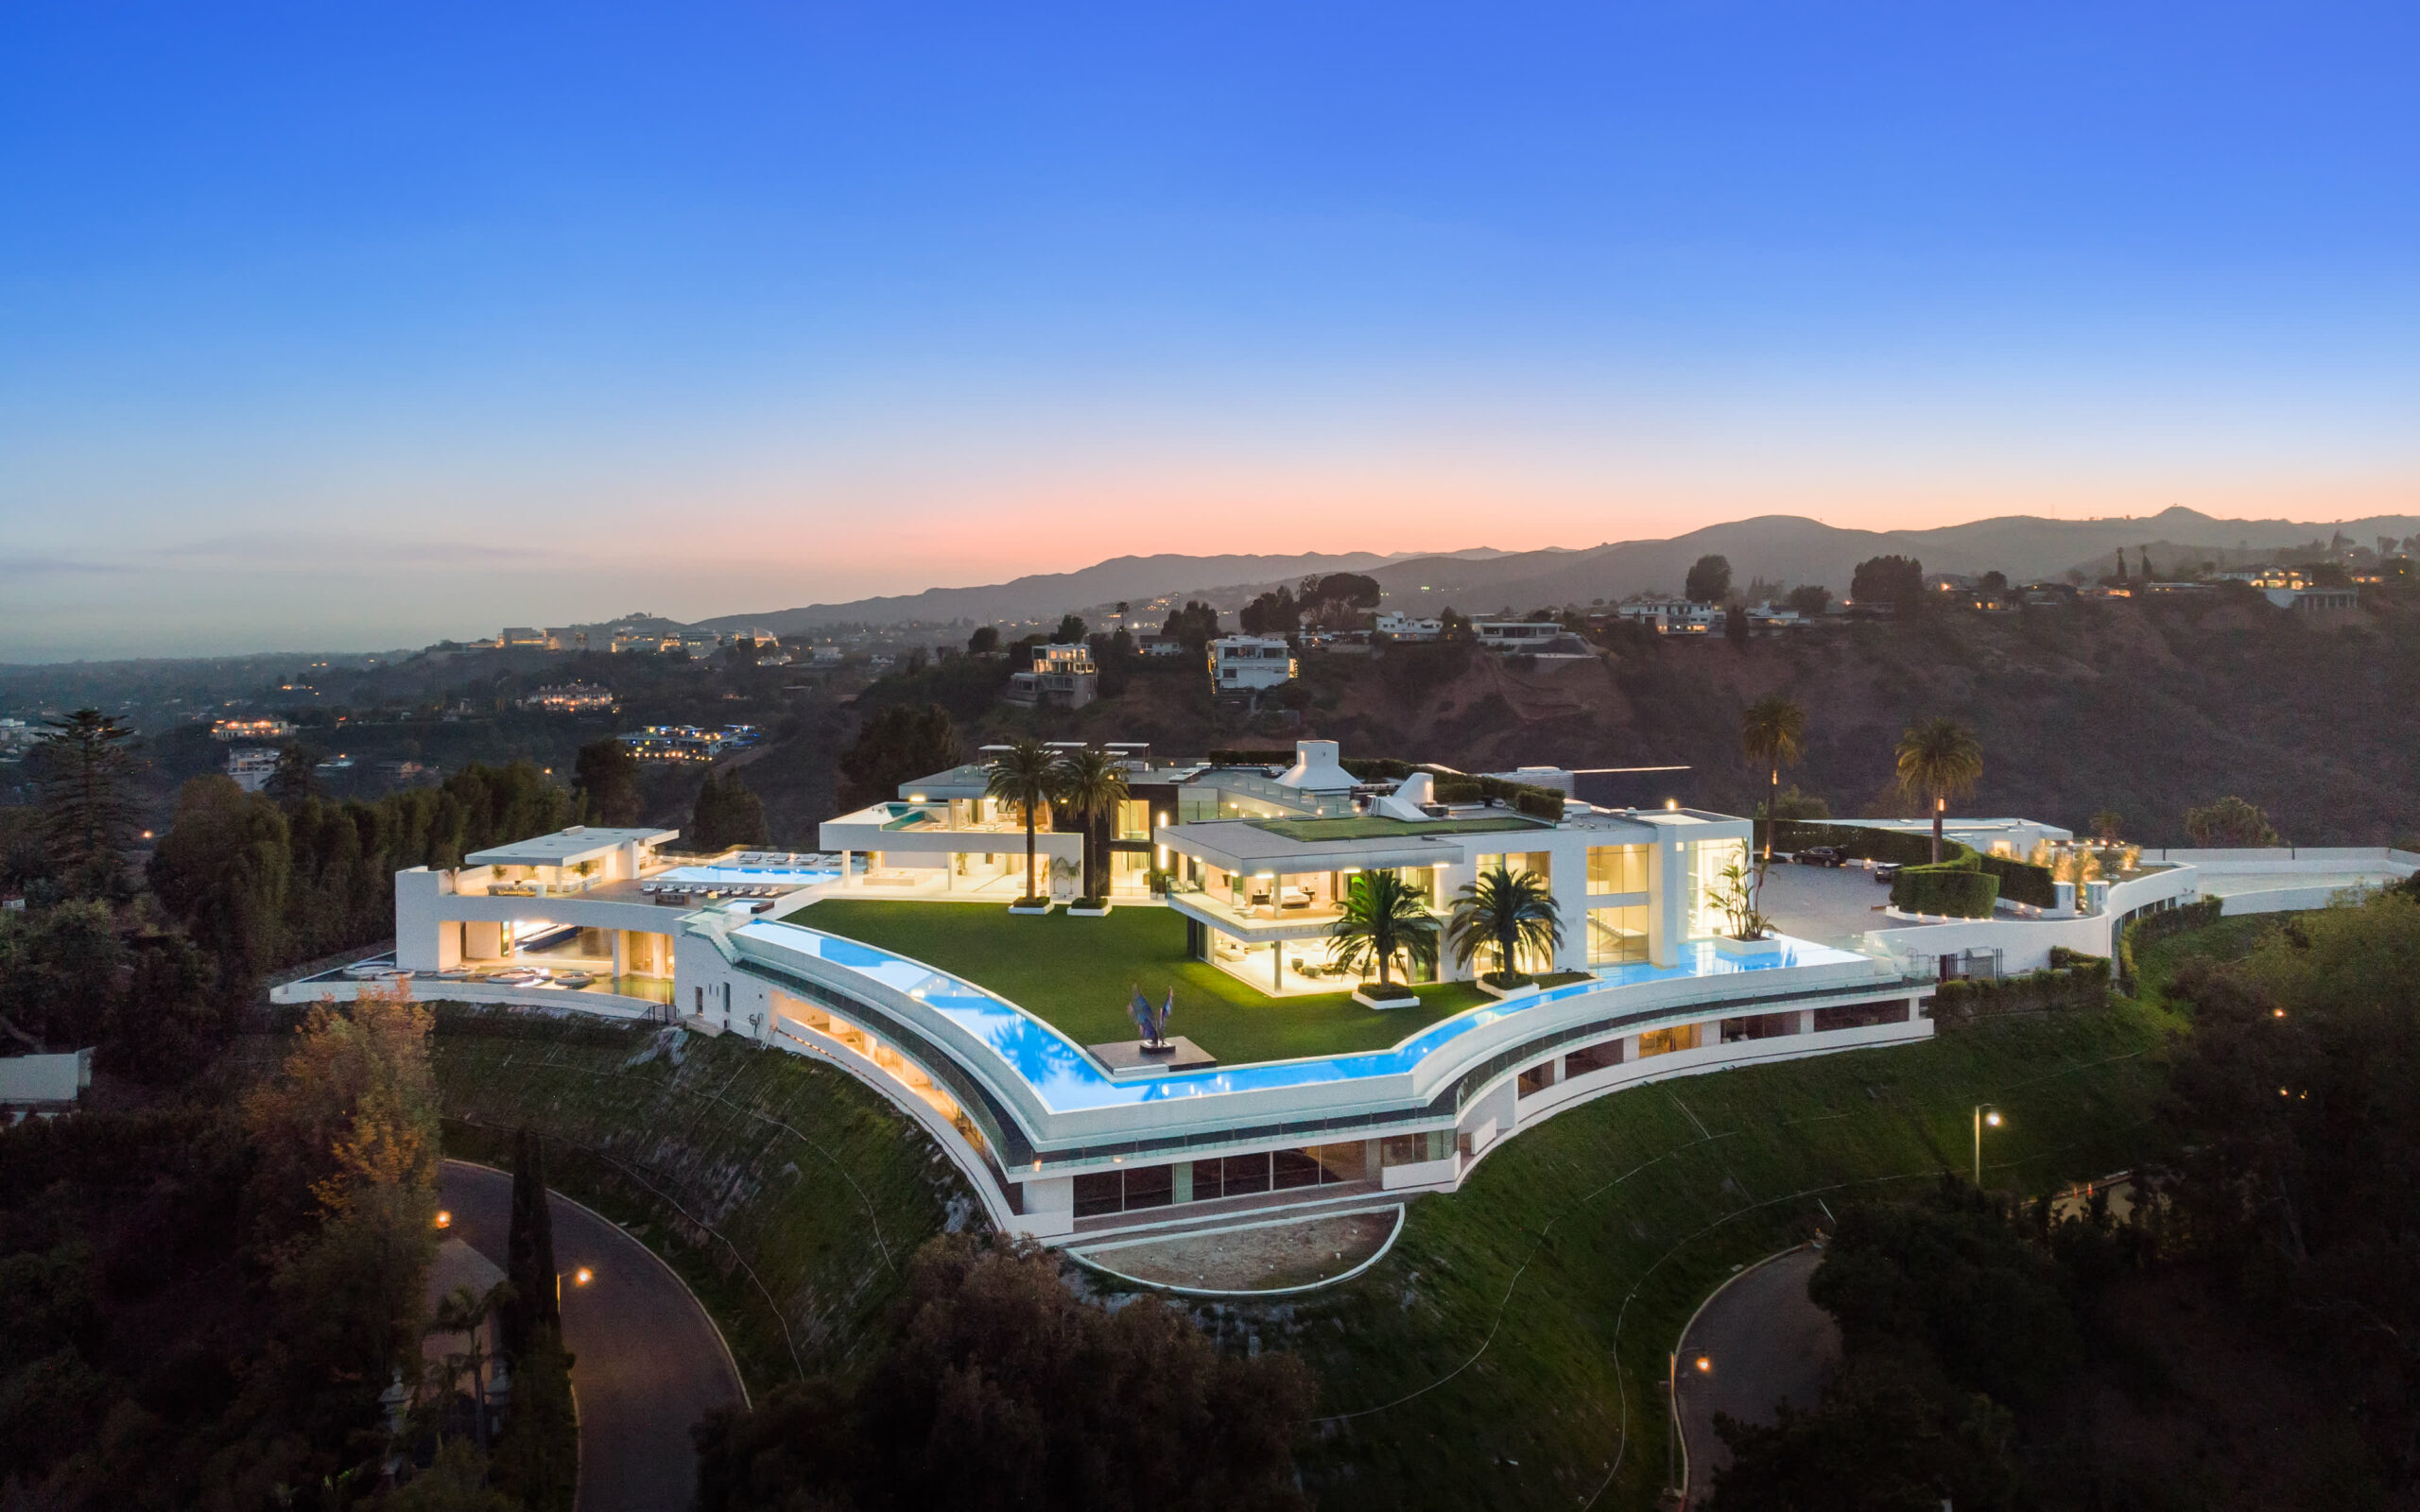 Most expensive home in America lists for $295 million, may head to auction